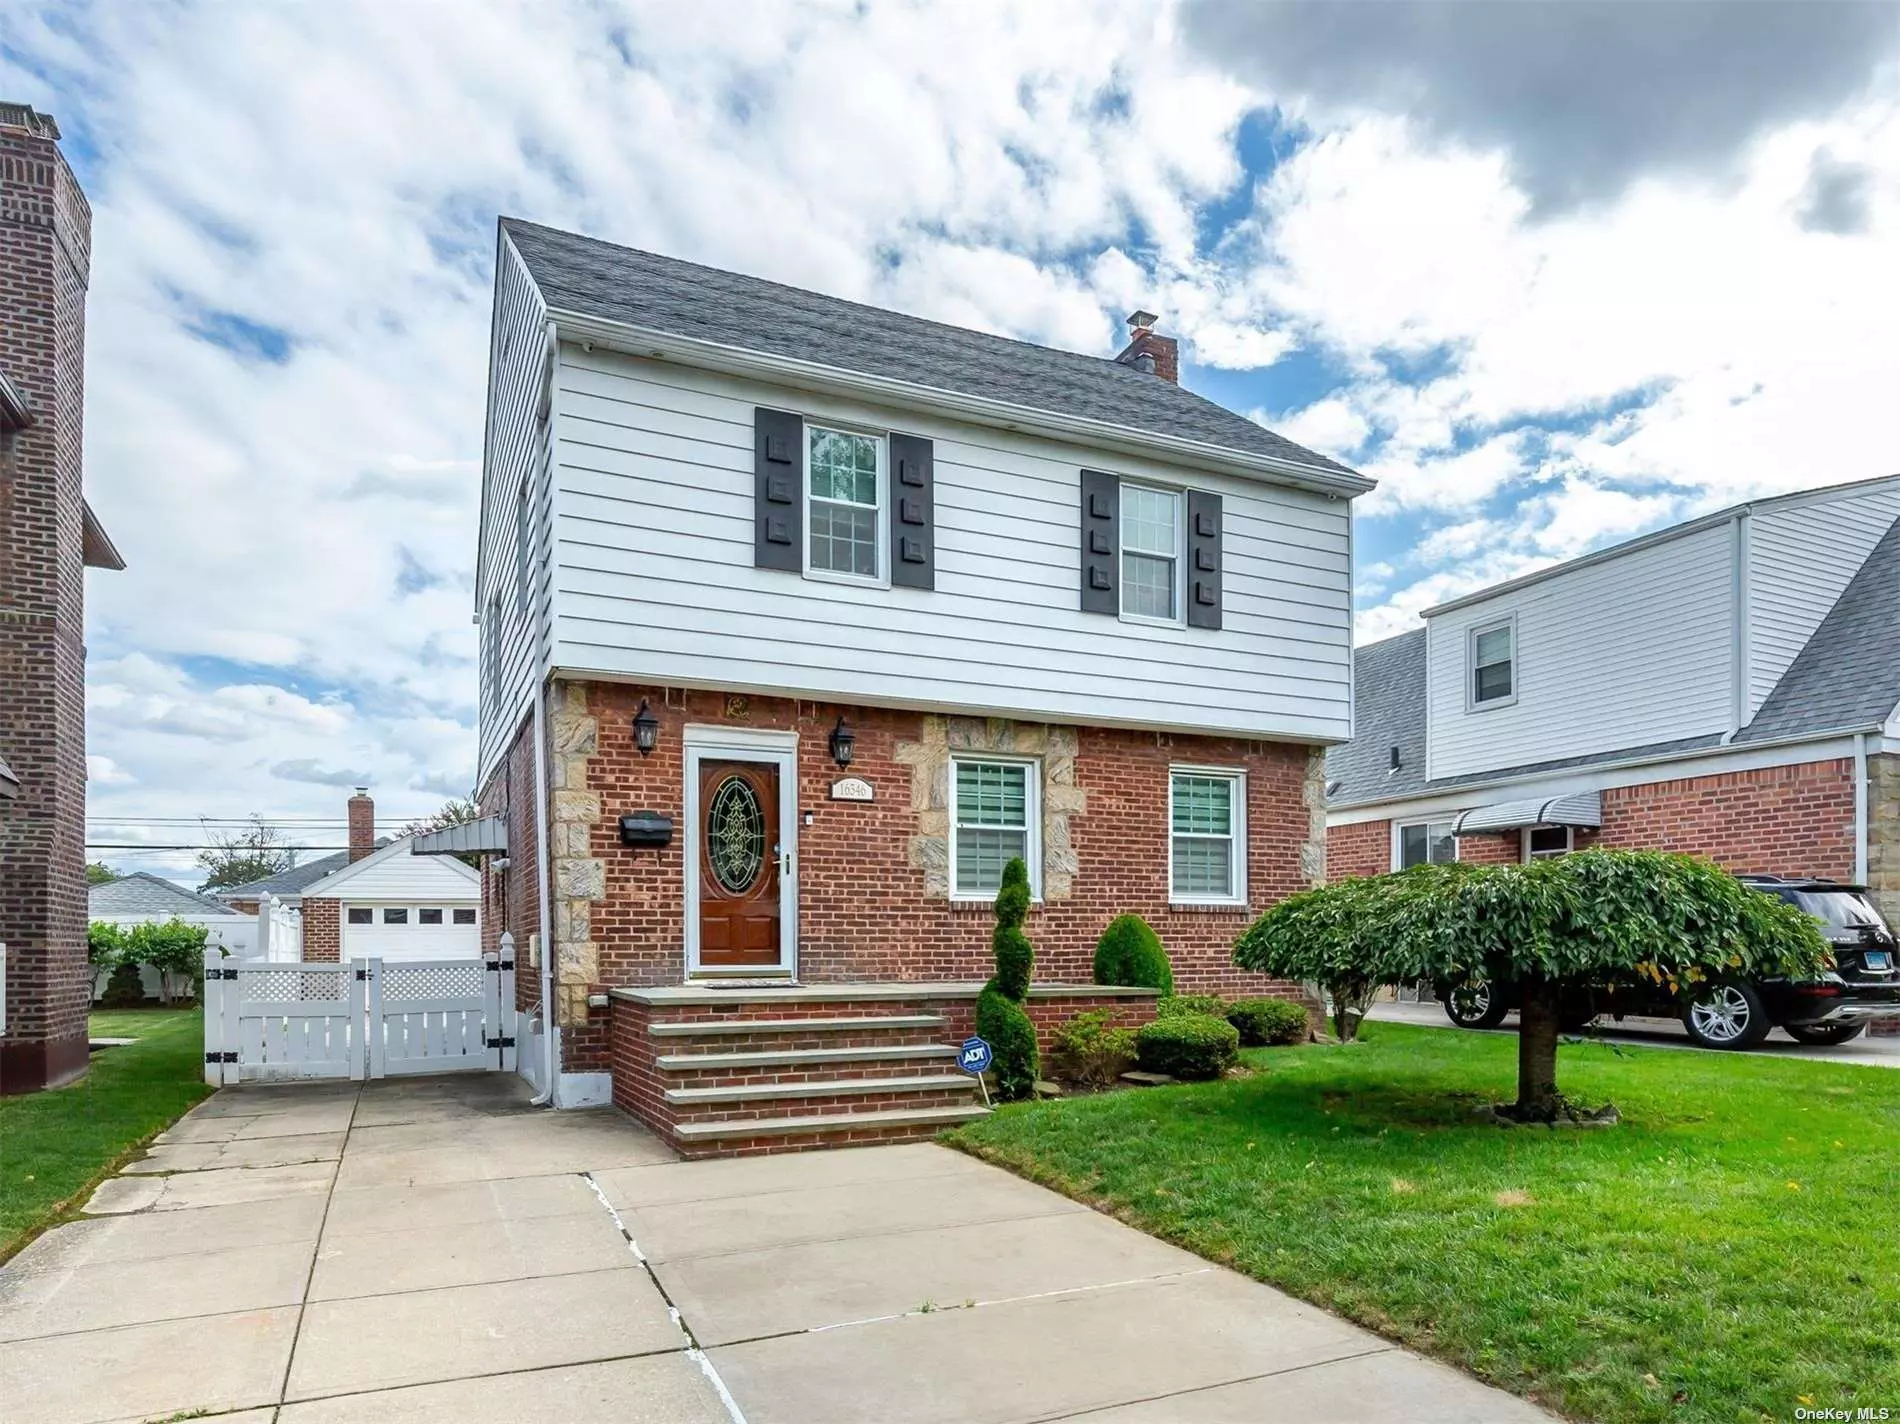 Mint Condition! 3 bedrooms, 1.55 Baths. Central A/C. Finished basement with outside entrance and high ceilings. House has heated in-ground granite pool. Five car private parking and 1 car detached garage. Whole house was renovated 5 years ago. Will not last long!